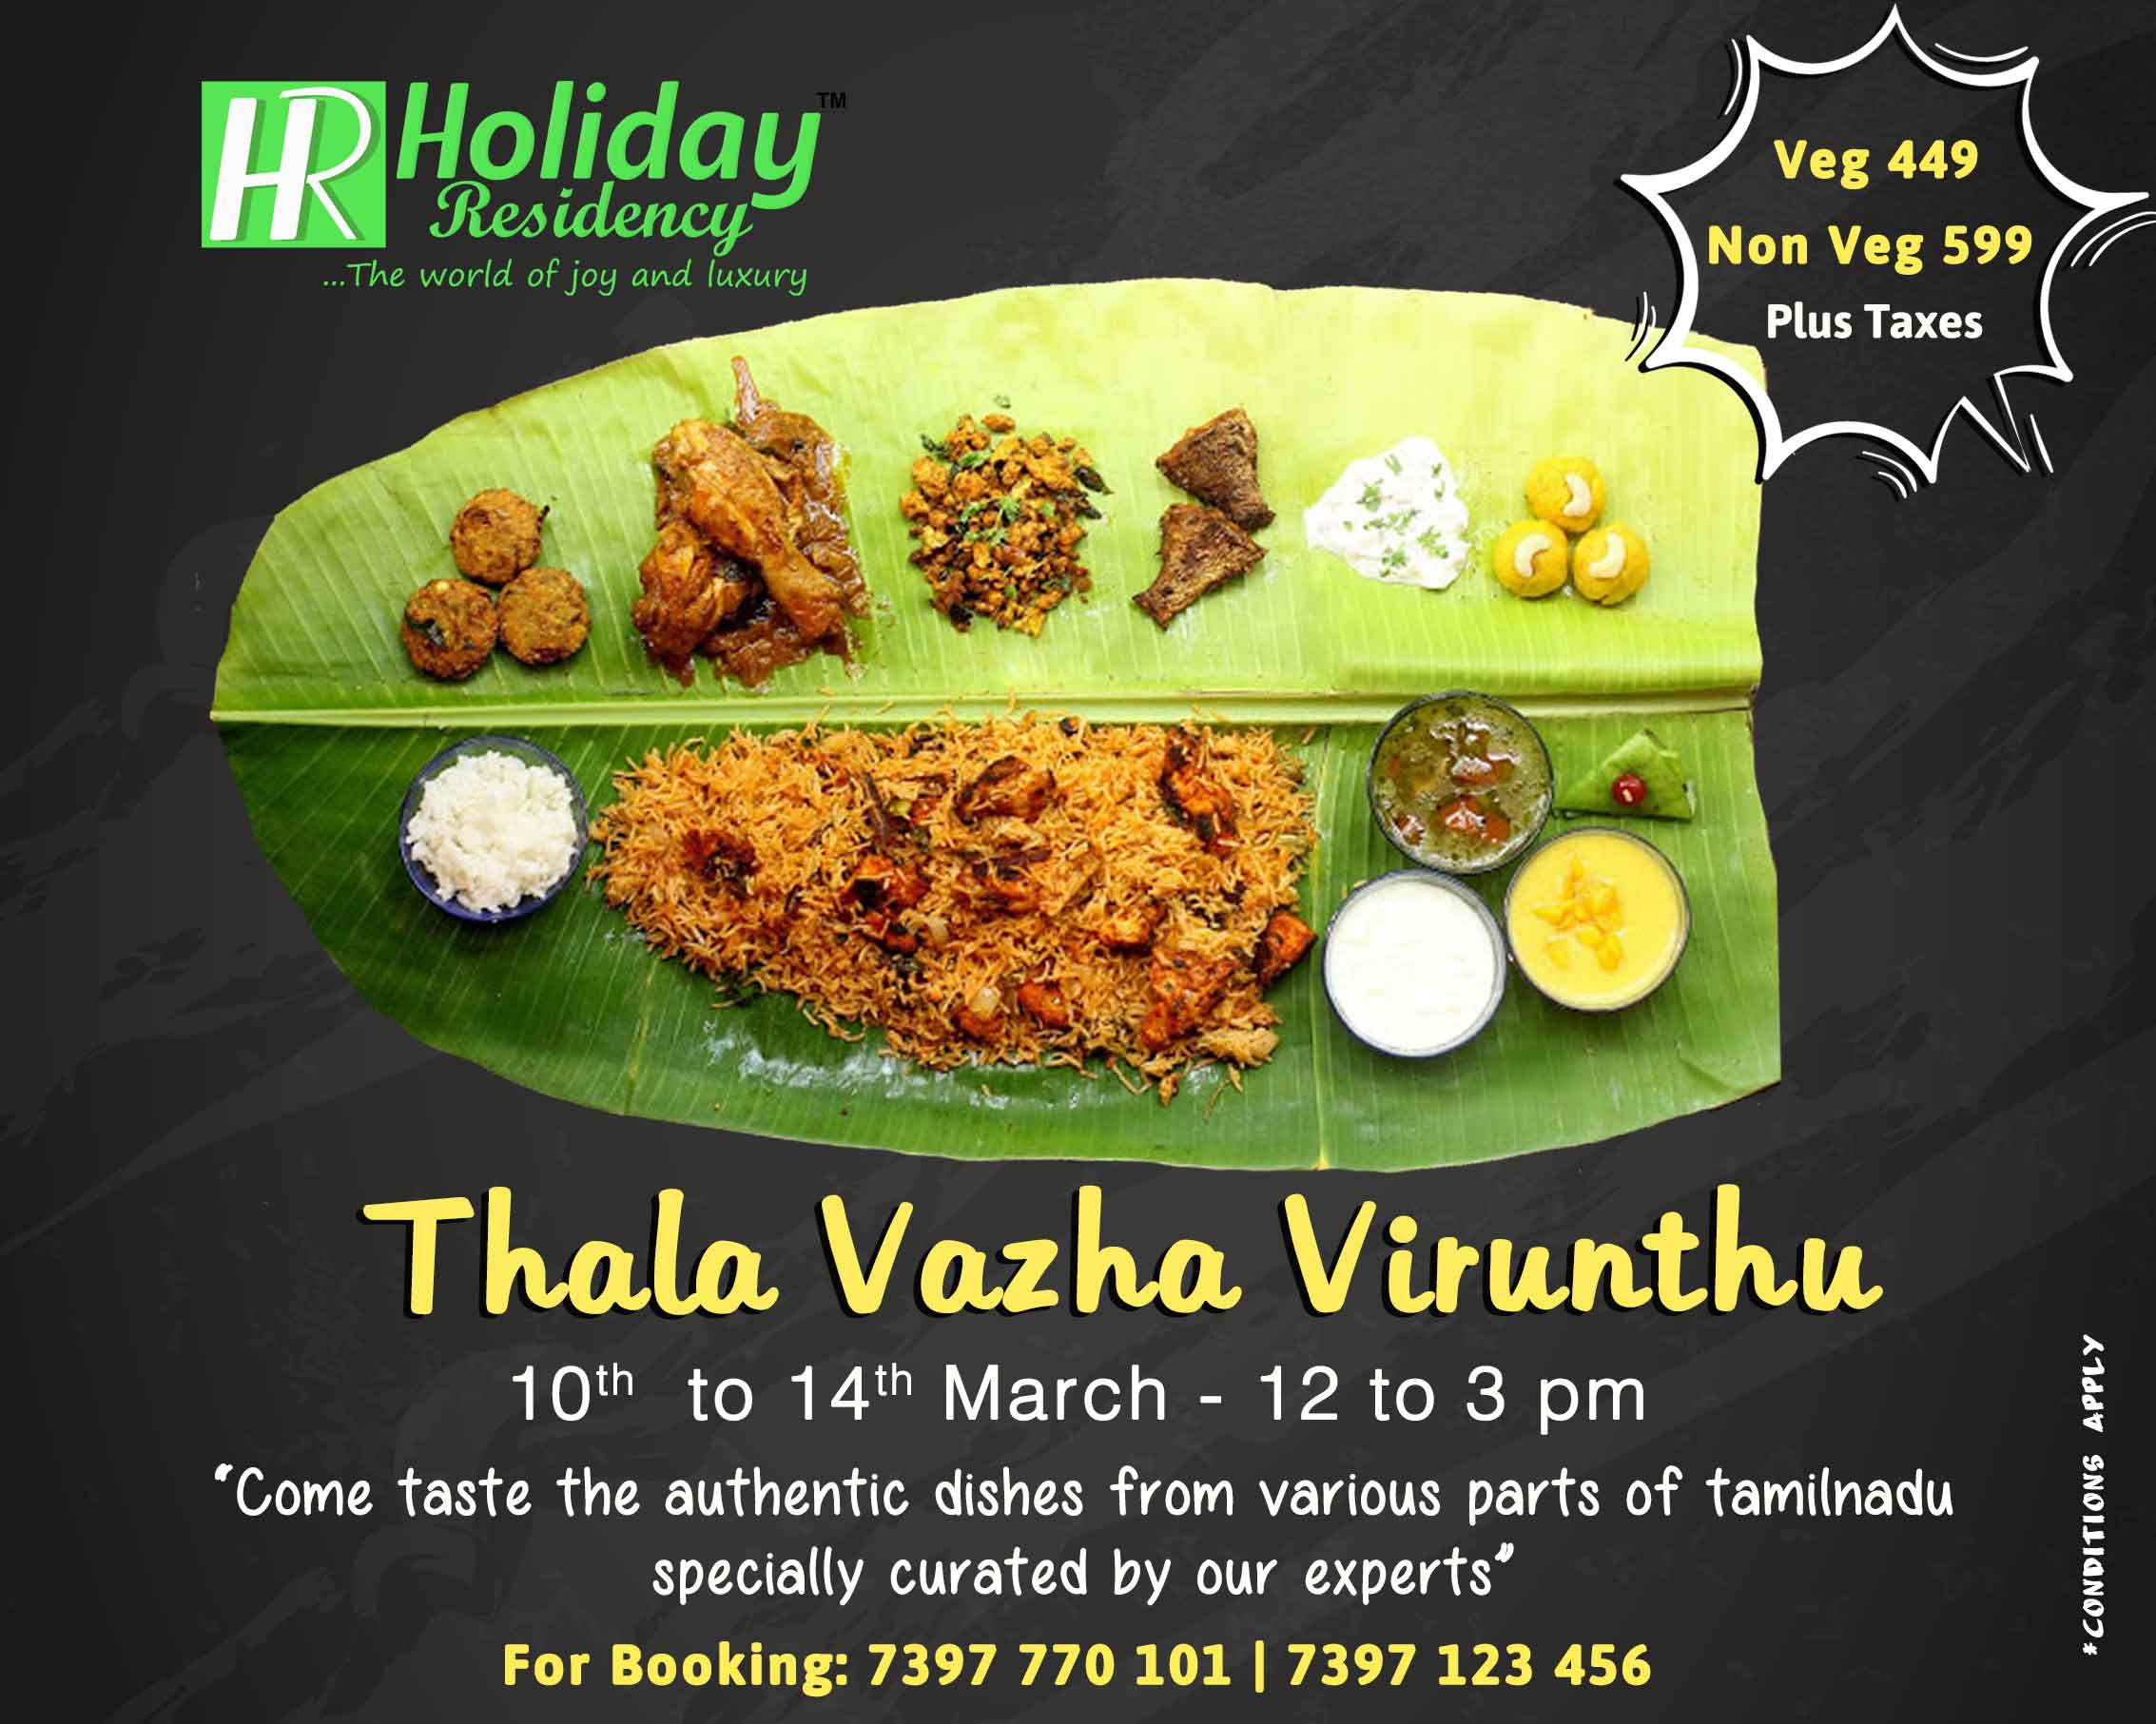 Delightful Food Around The Clock.. @ Holiday Residency ..! Only 10th-14th March 2020..!, Coimbatore, Tamil Nadu, India